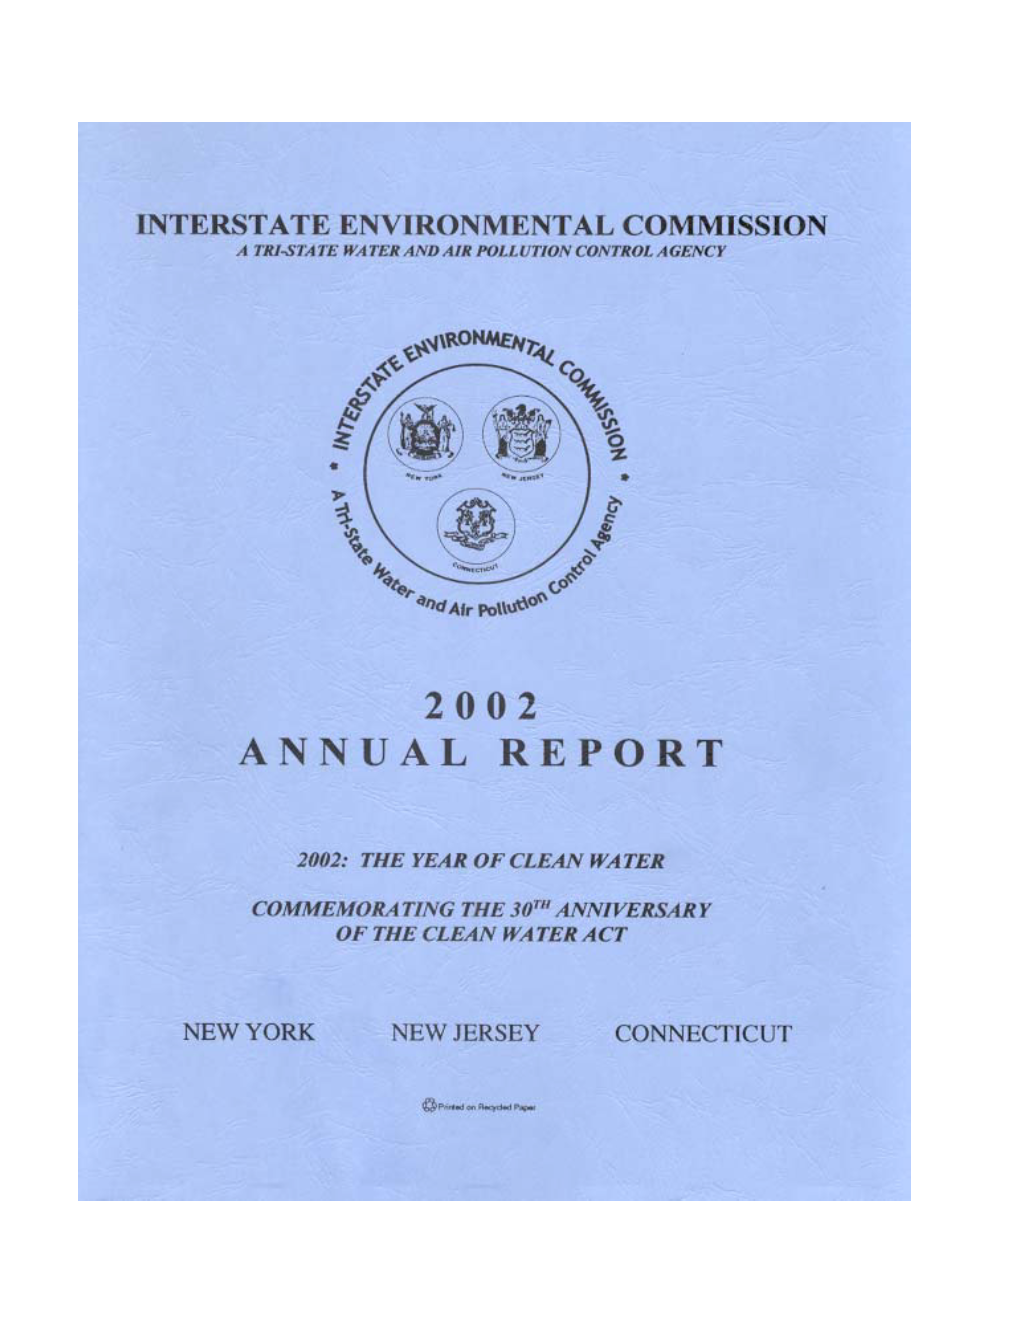 2002 Annual Report of the Interstate Environmental Commission